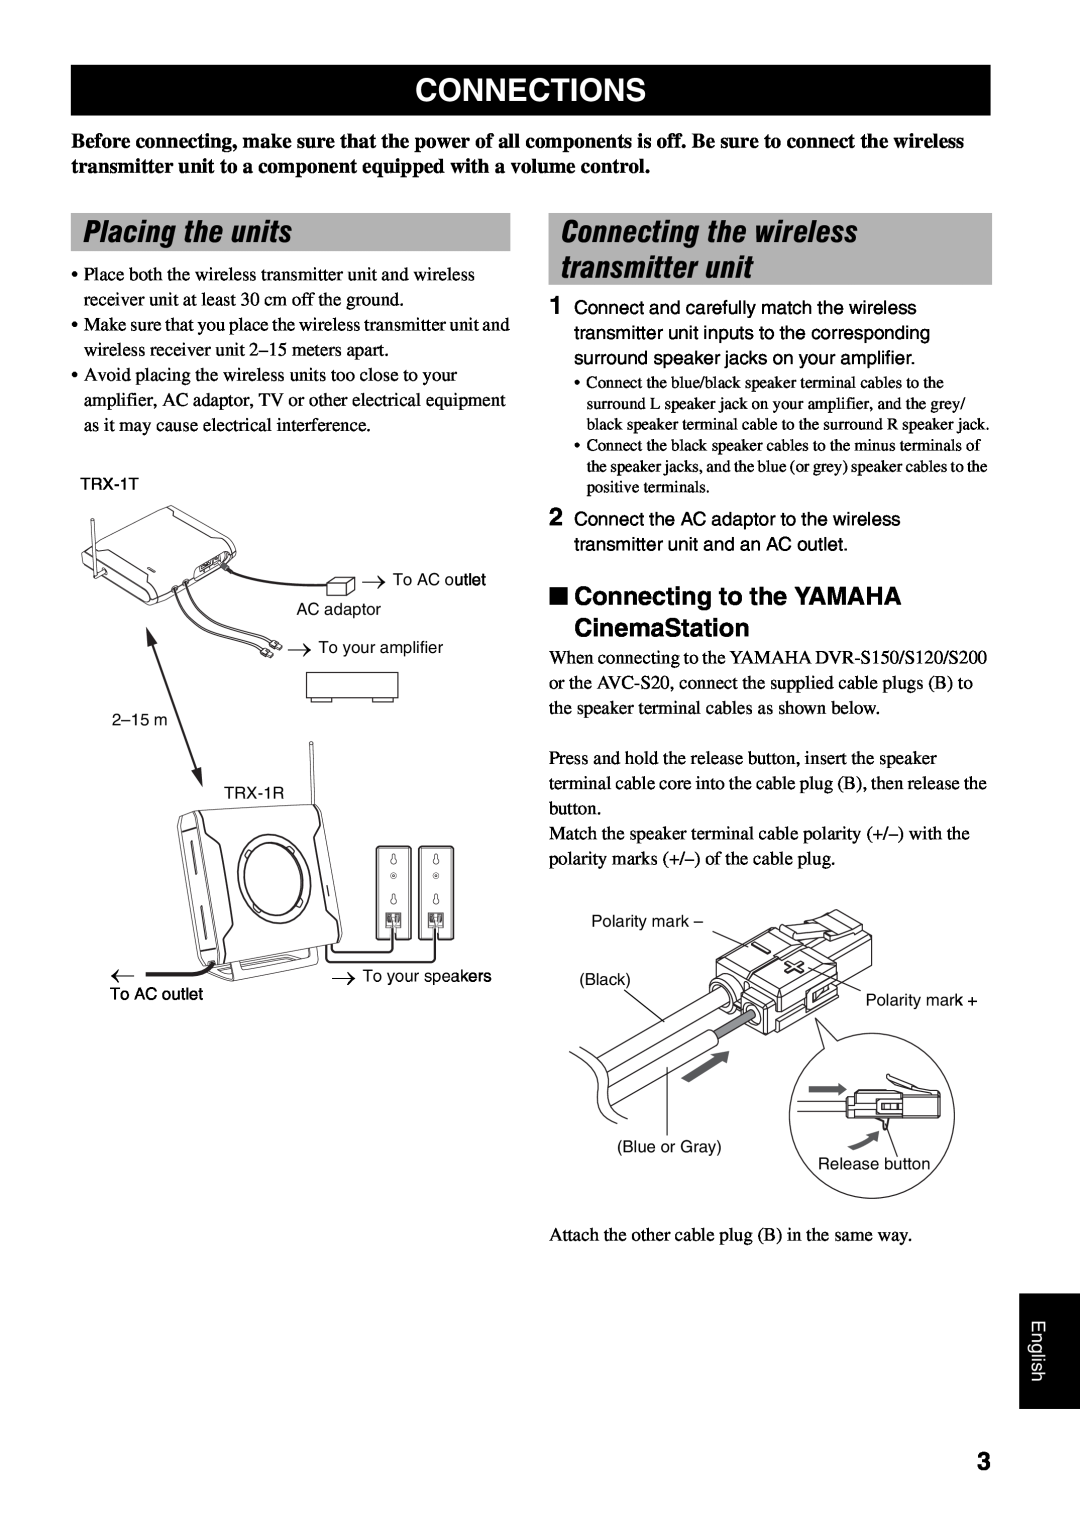 Yamaha TRX-1T, TRX-1R owner manual Connections, Placing the units, Connecting to the YAMAHA CinemaStation, English 